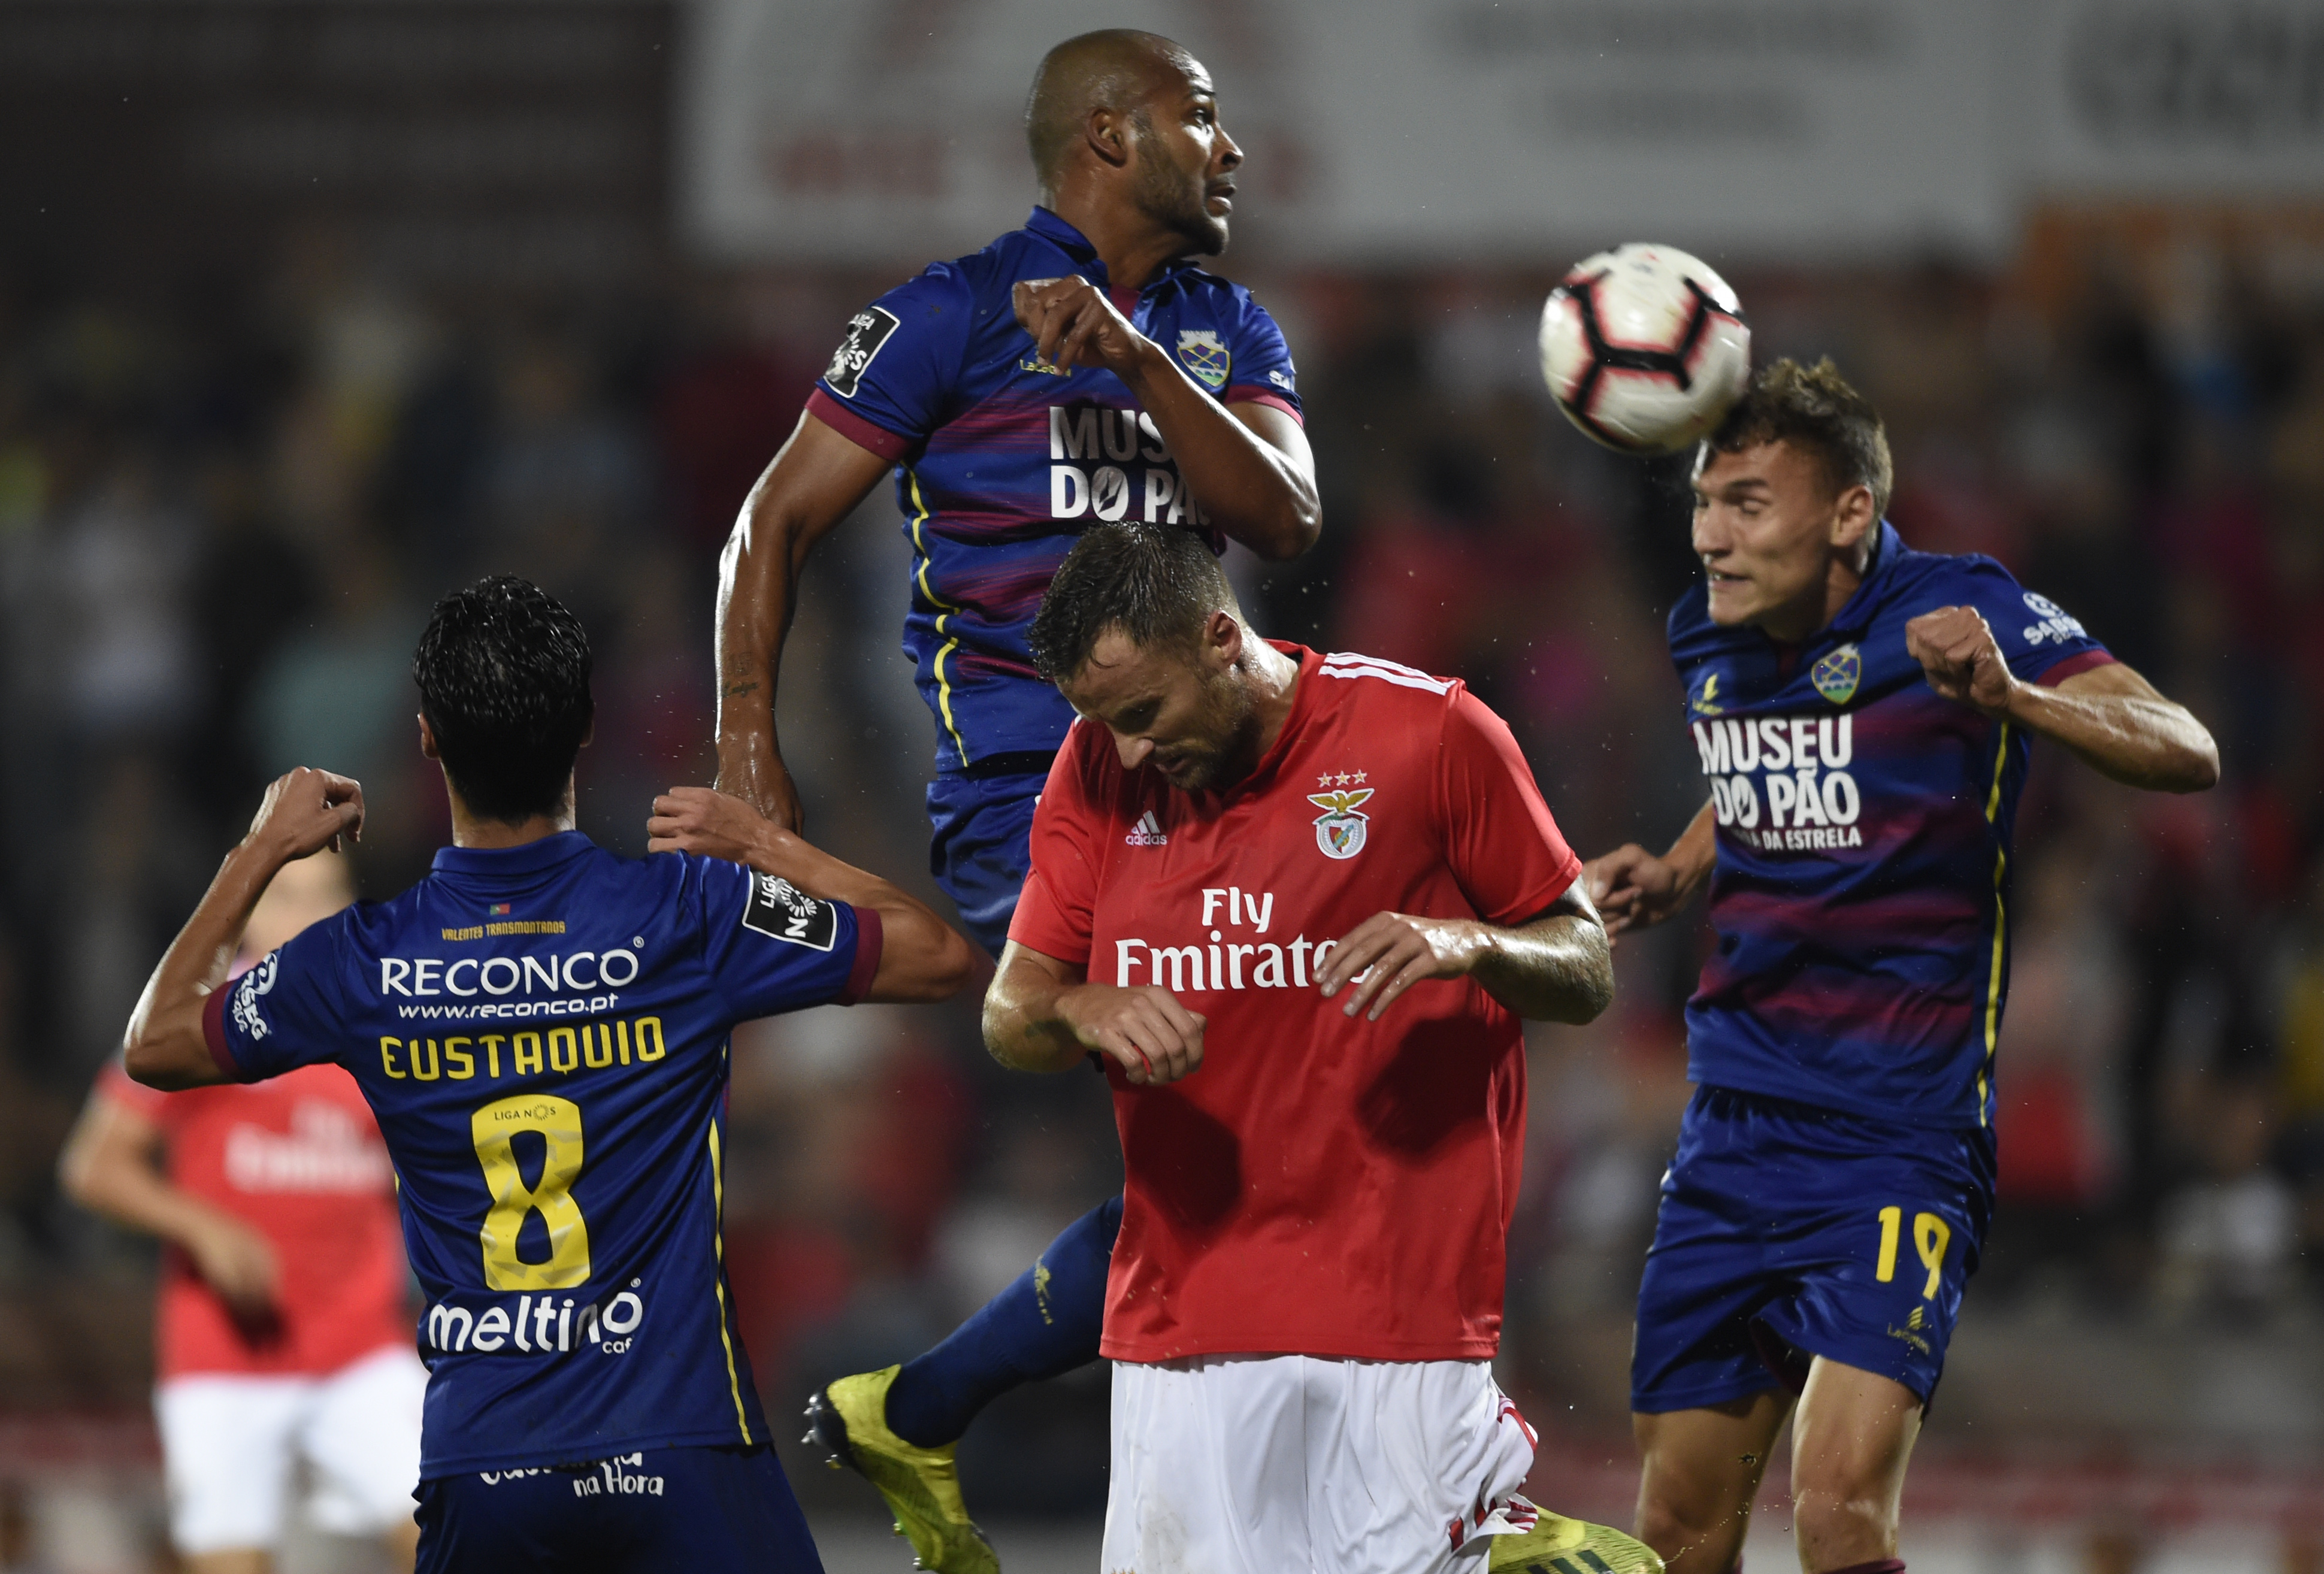 Benfica's Swiss forward Haris Seferovic (C) jumps for the ball with Chaves' Portuguese midfielder Stephen Eustaquio (L), Brazilian defender Marcao (TOP) and Serbian defender Nikola Maras during the Portuguese league footbal match between GD Chaves and SL Benfica at the Municipal Eng. Manuel Branco Teixeira stadium in Chaves on September 27, 2018. (Photo by MIGUEL RIOPA / AFP)        (Photo credit should read MIGUEL RIOPA/AFP/Getty Images)